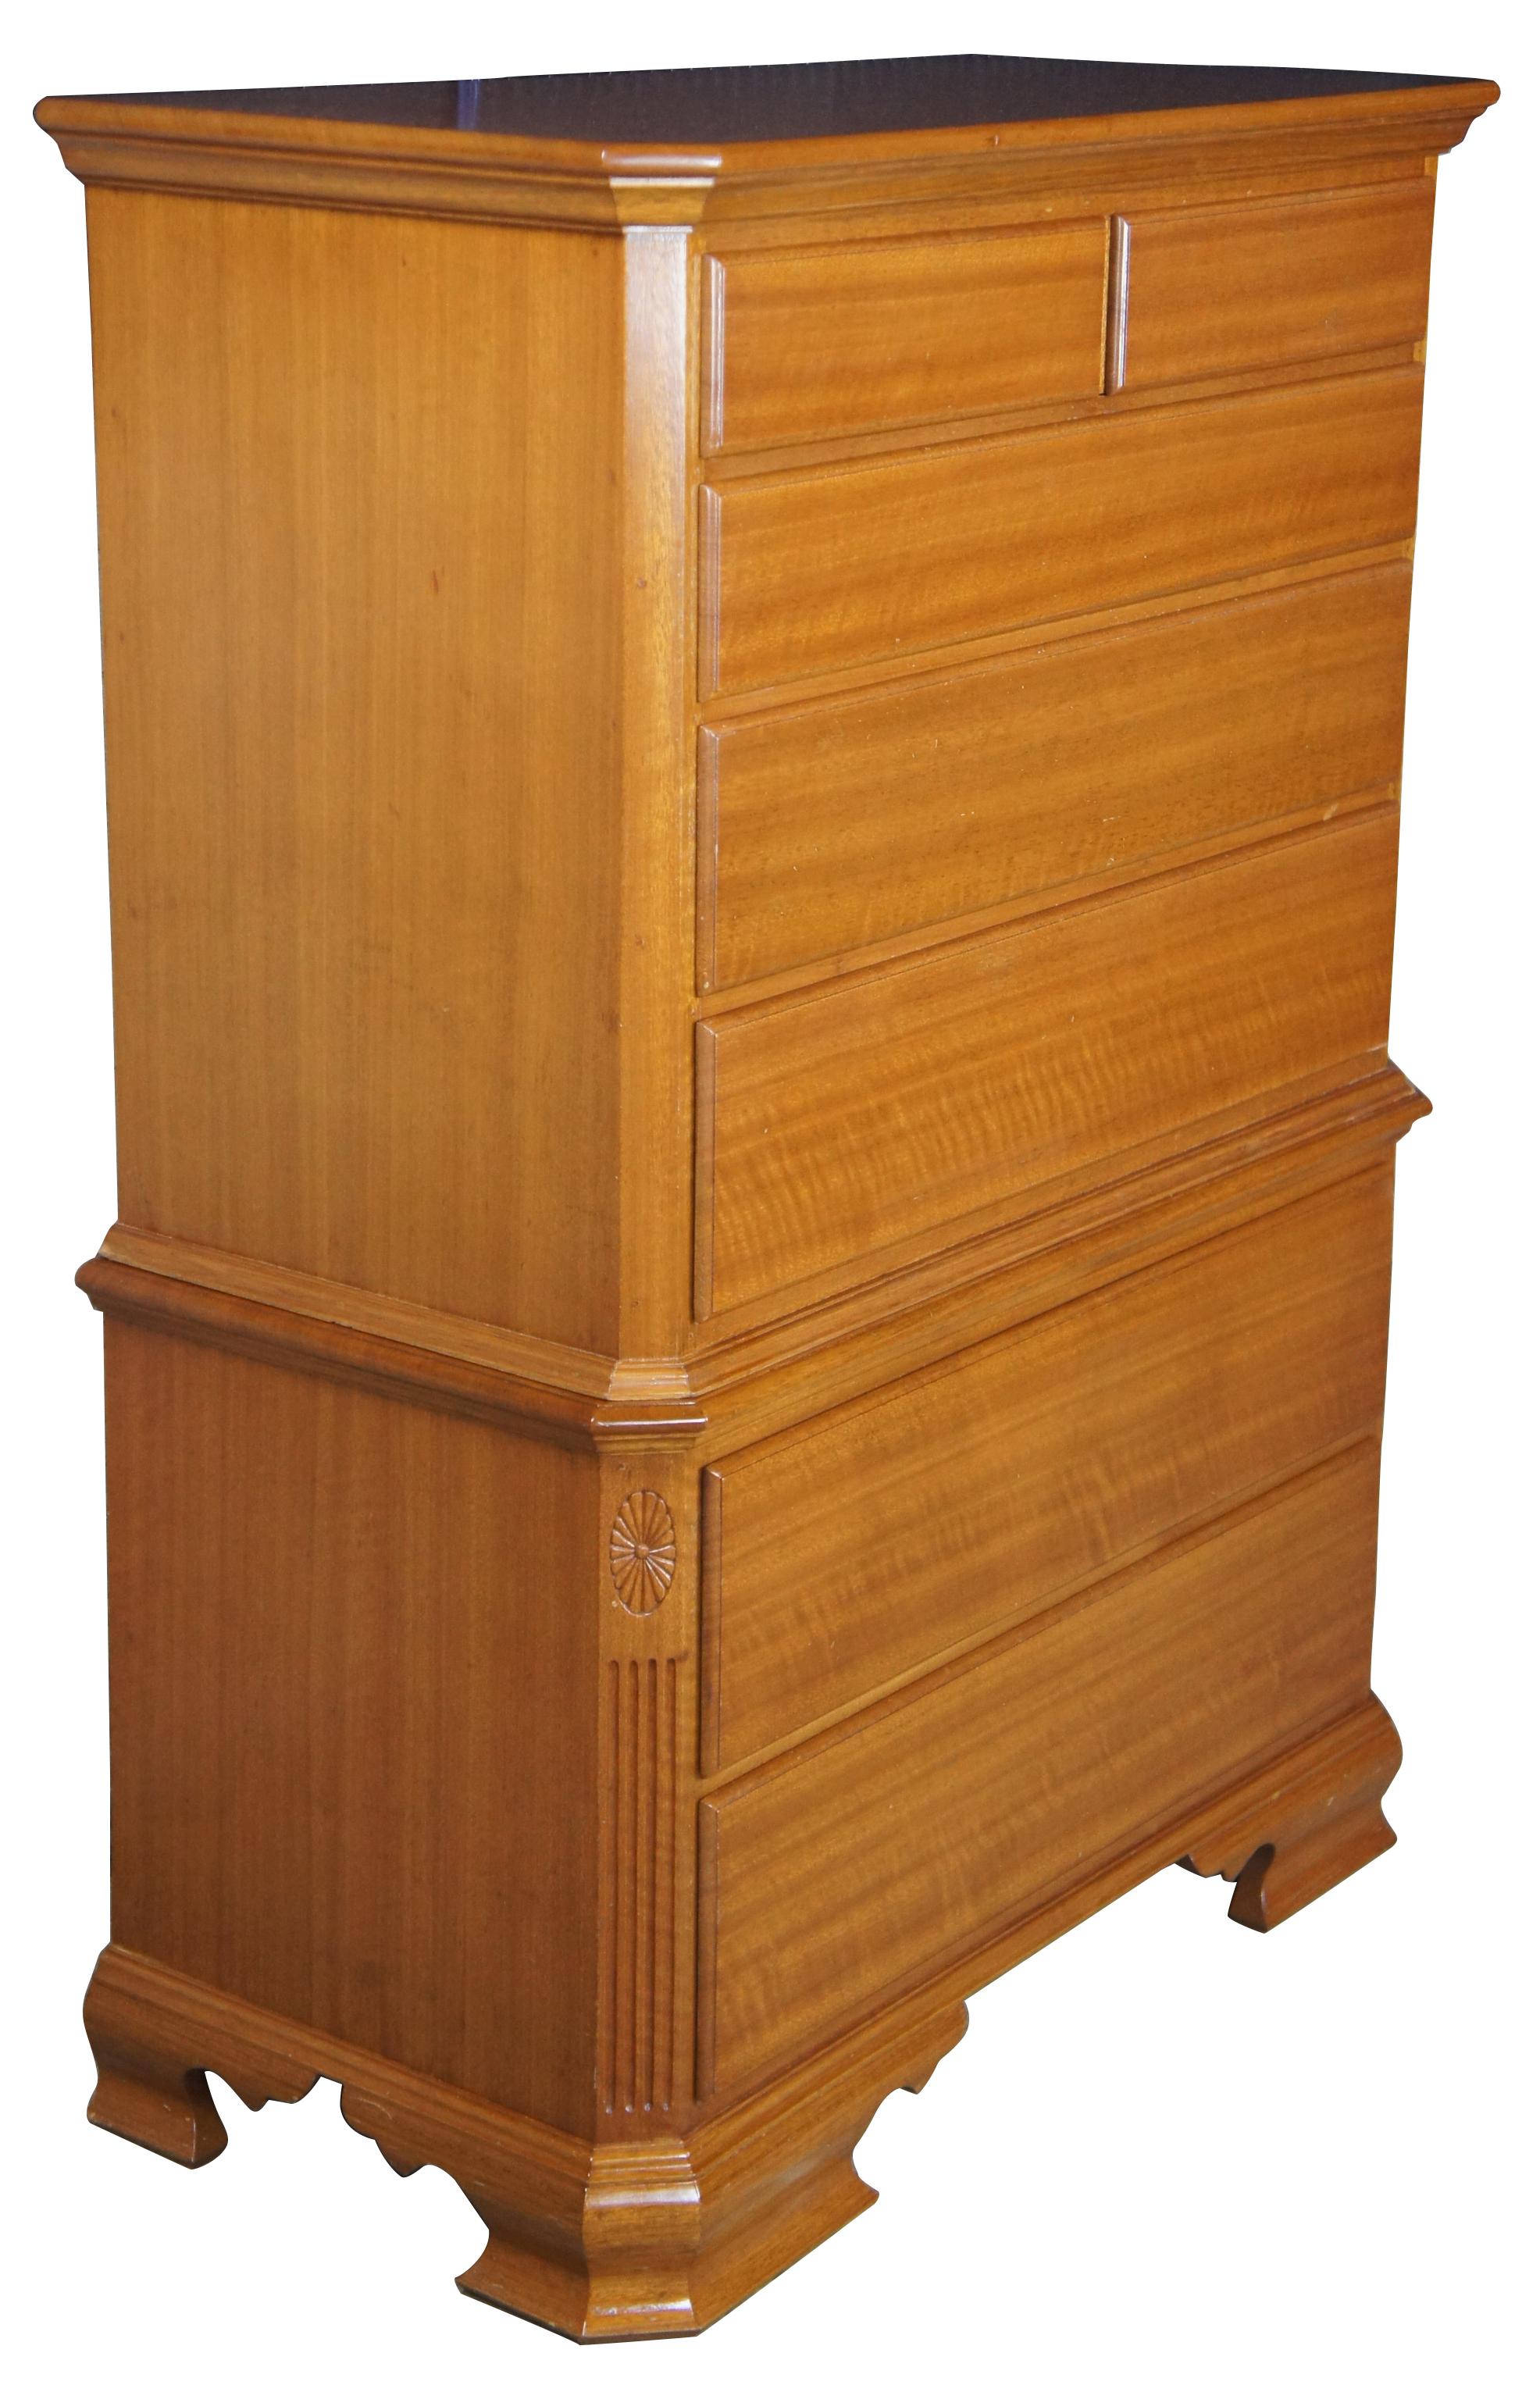 Early American style solid mahogany chest on chest highboy dresser 40